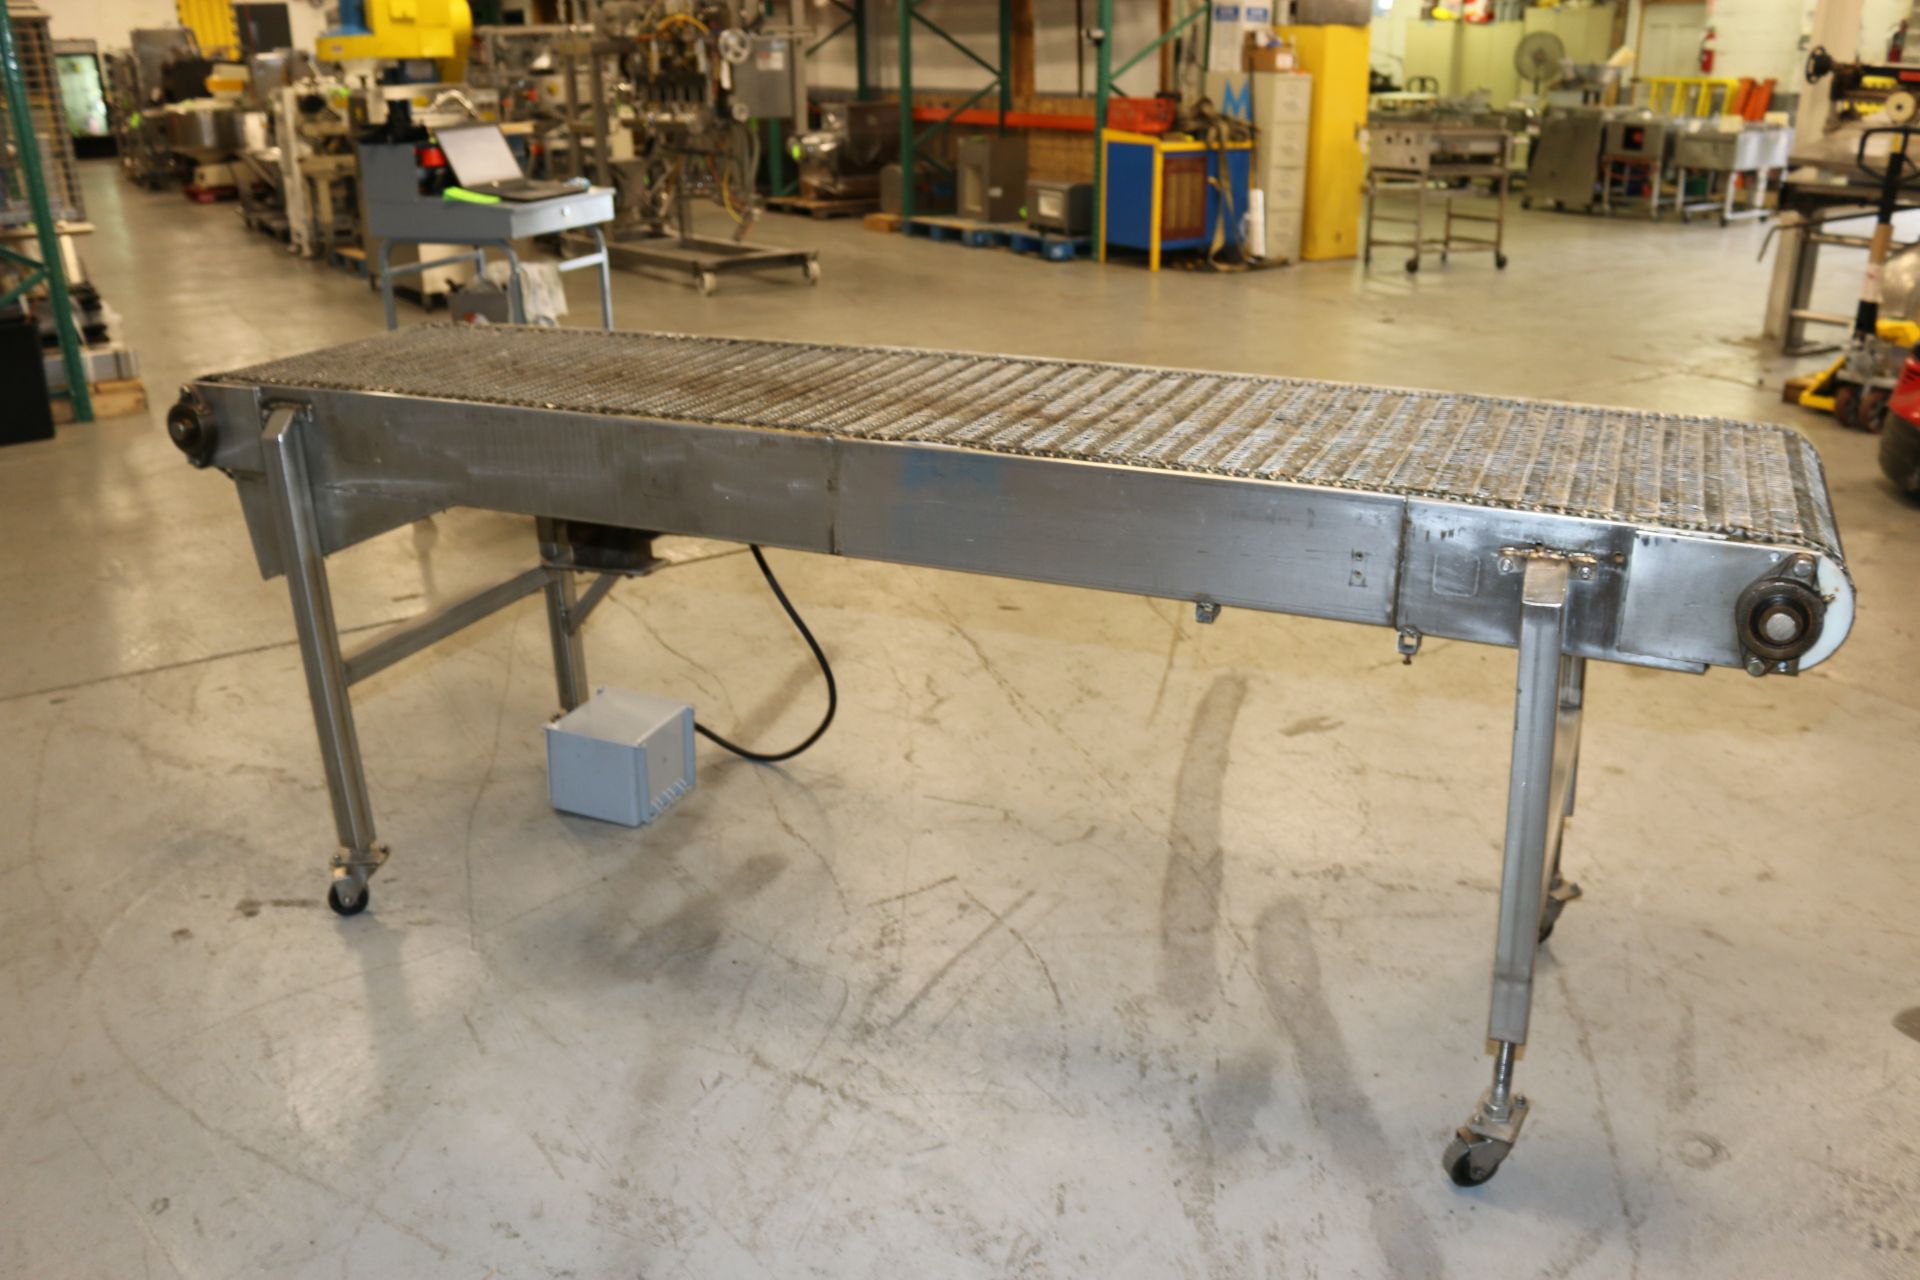 Straight Section of S/S Mesh Conveyor, with 1725 RPM Drive, Overall Dims.: Aprox. 105" L x 32" W x - Image 7 of 7